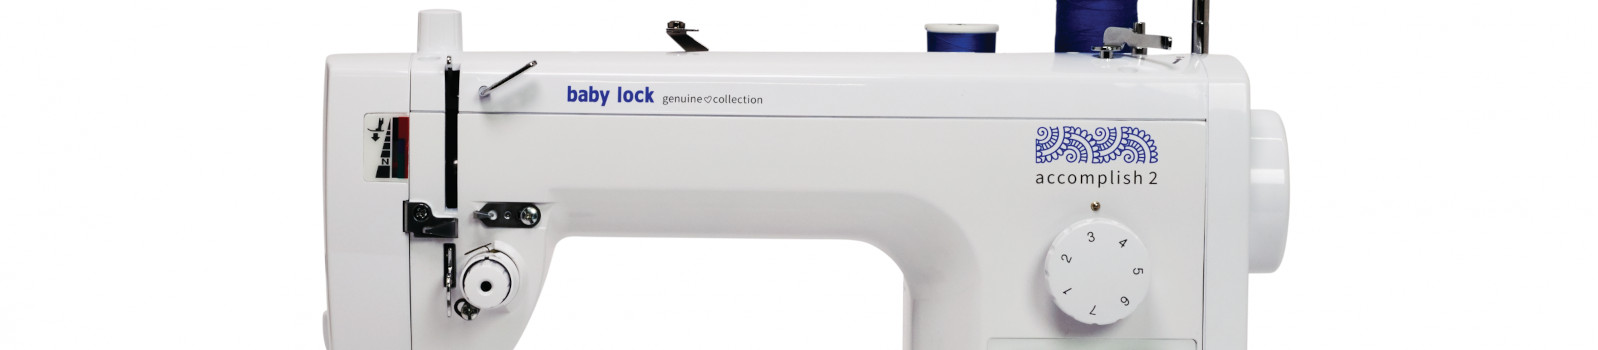 Baby Lock Solaris Vision Sewing & Embroidery Machine